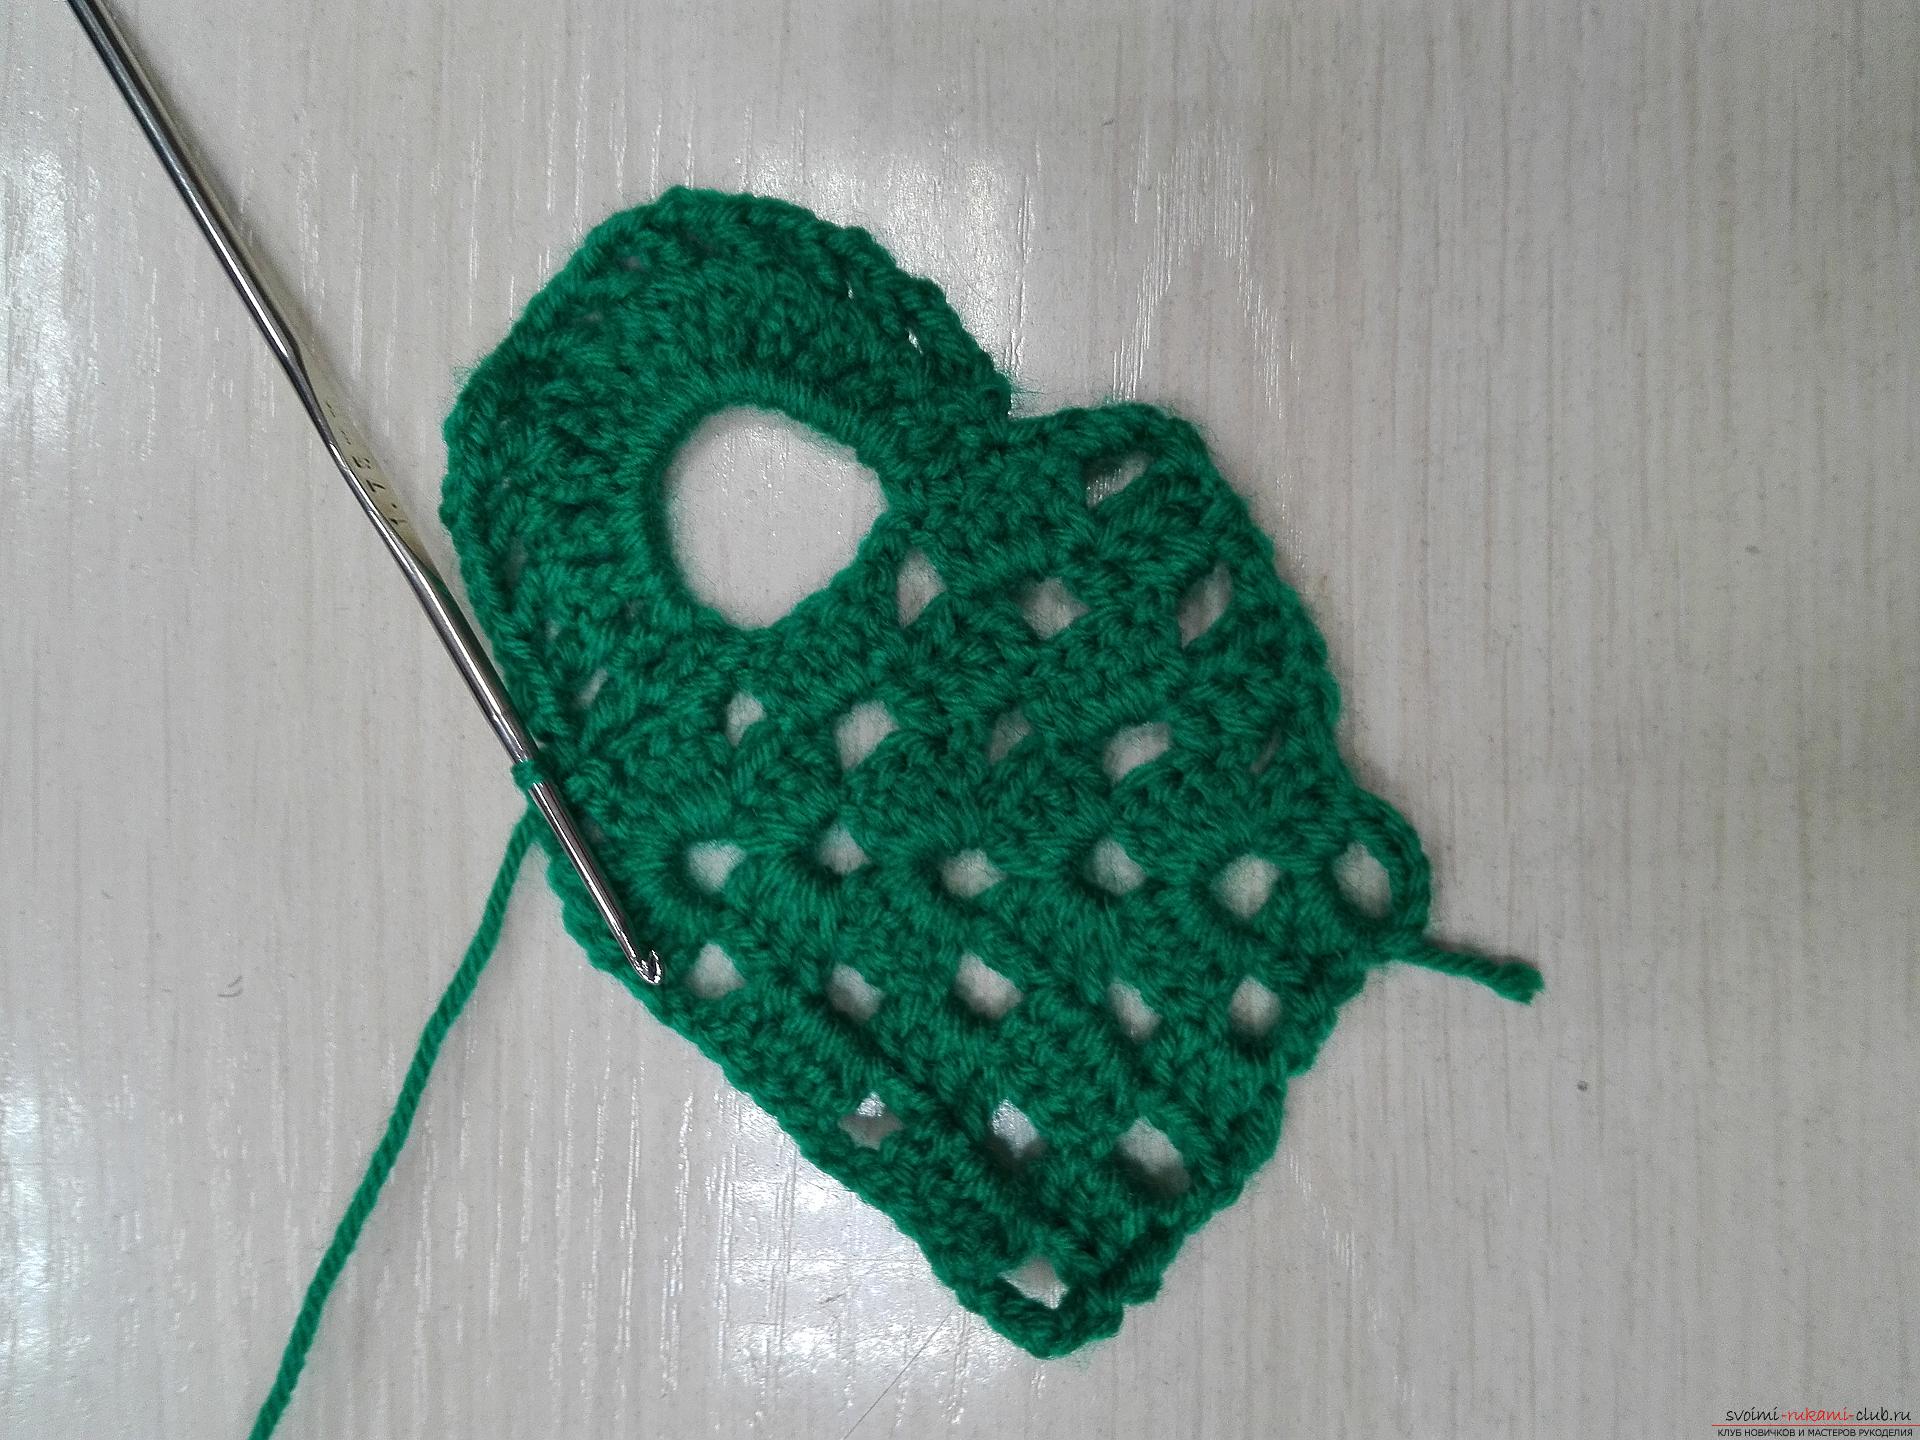 This master class on knitting is designed by the lover - he will teach how to tie the heart crochet. Photo Number 18